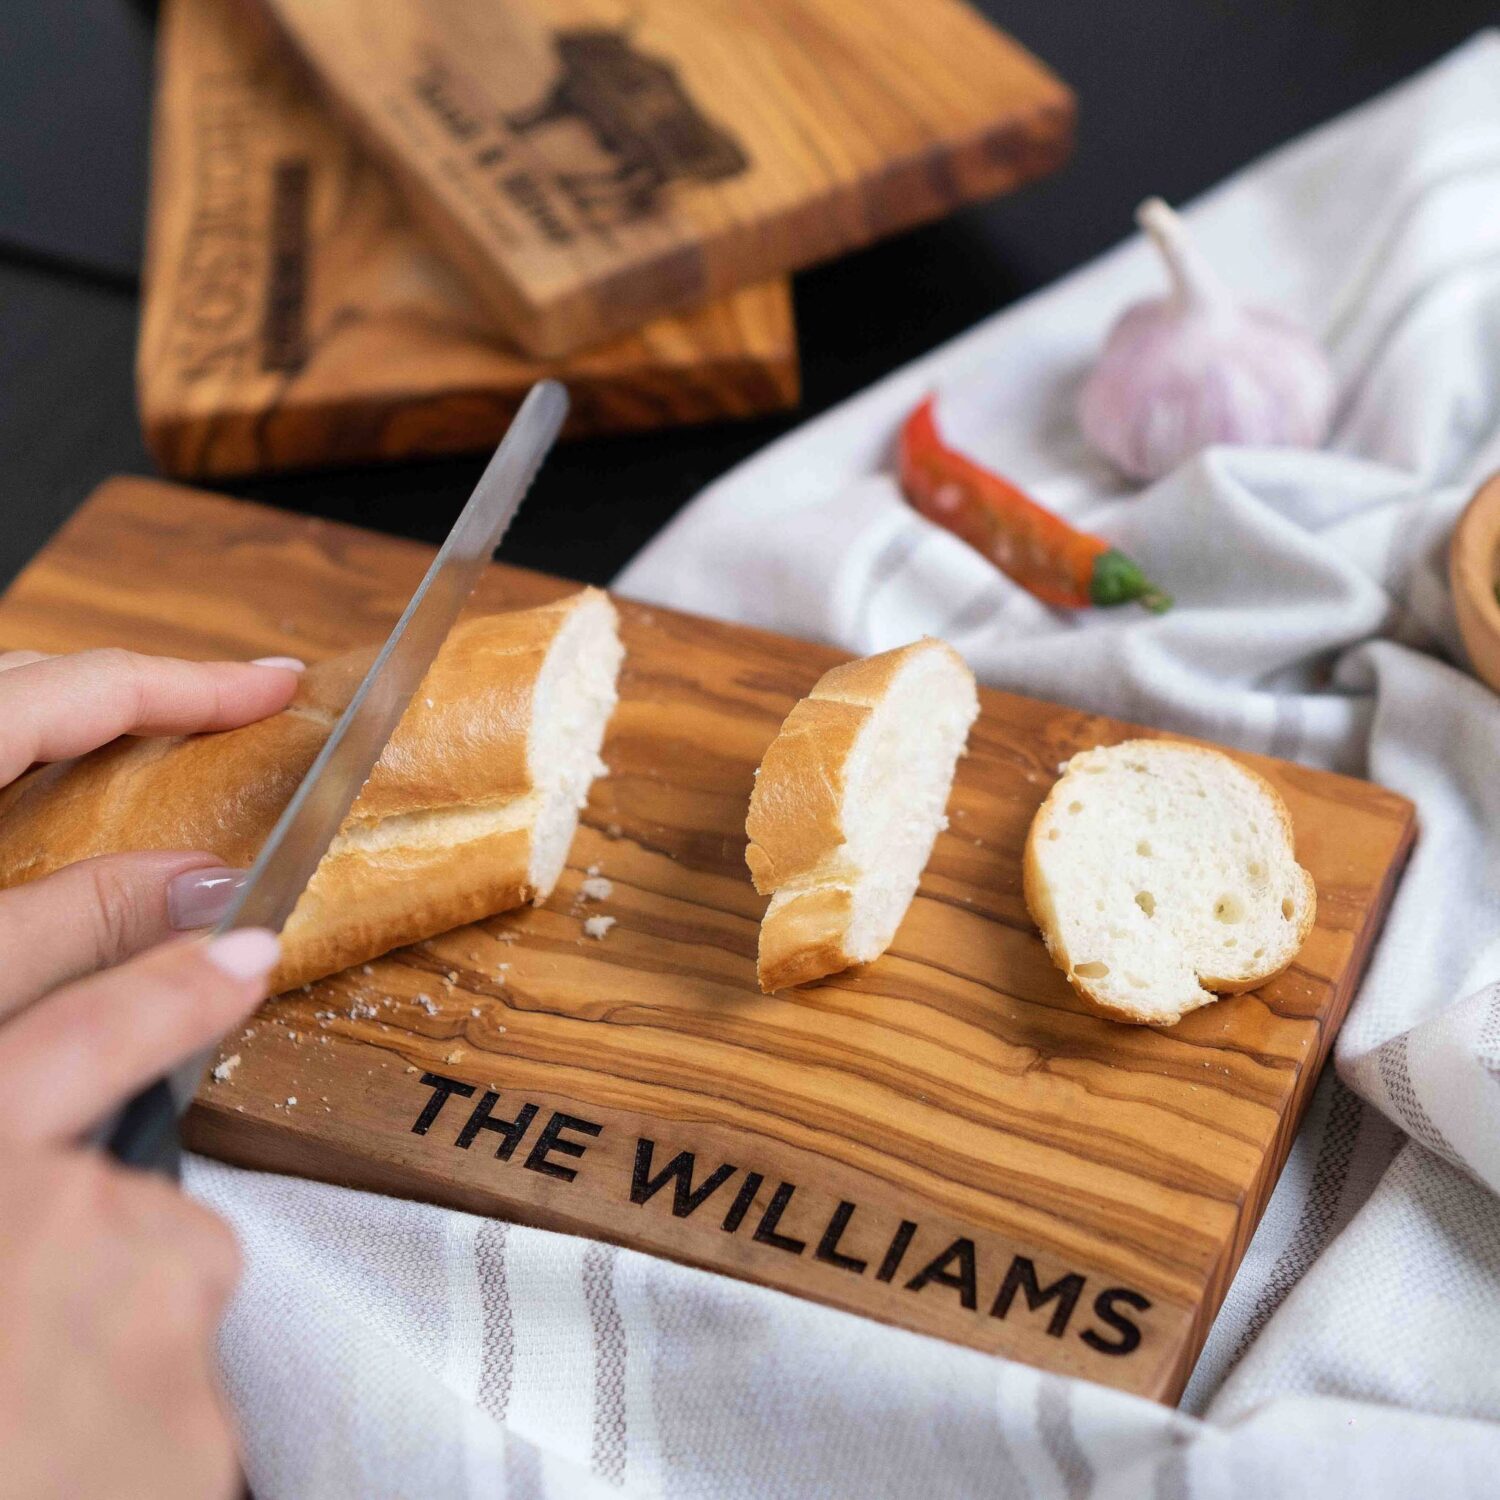 A person cutting bread on a wooden cutting board.